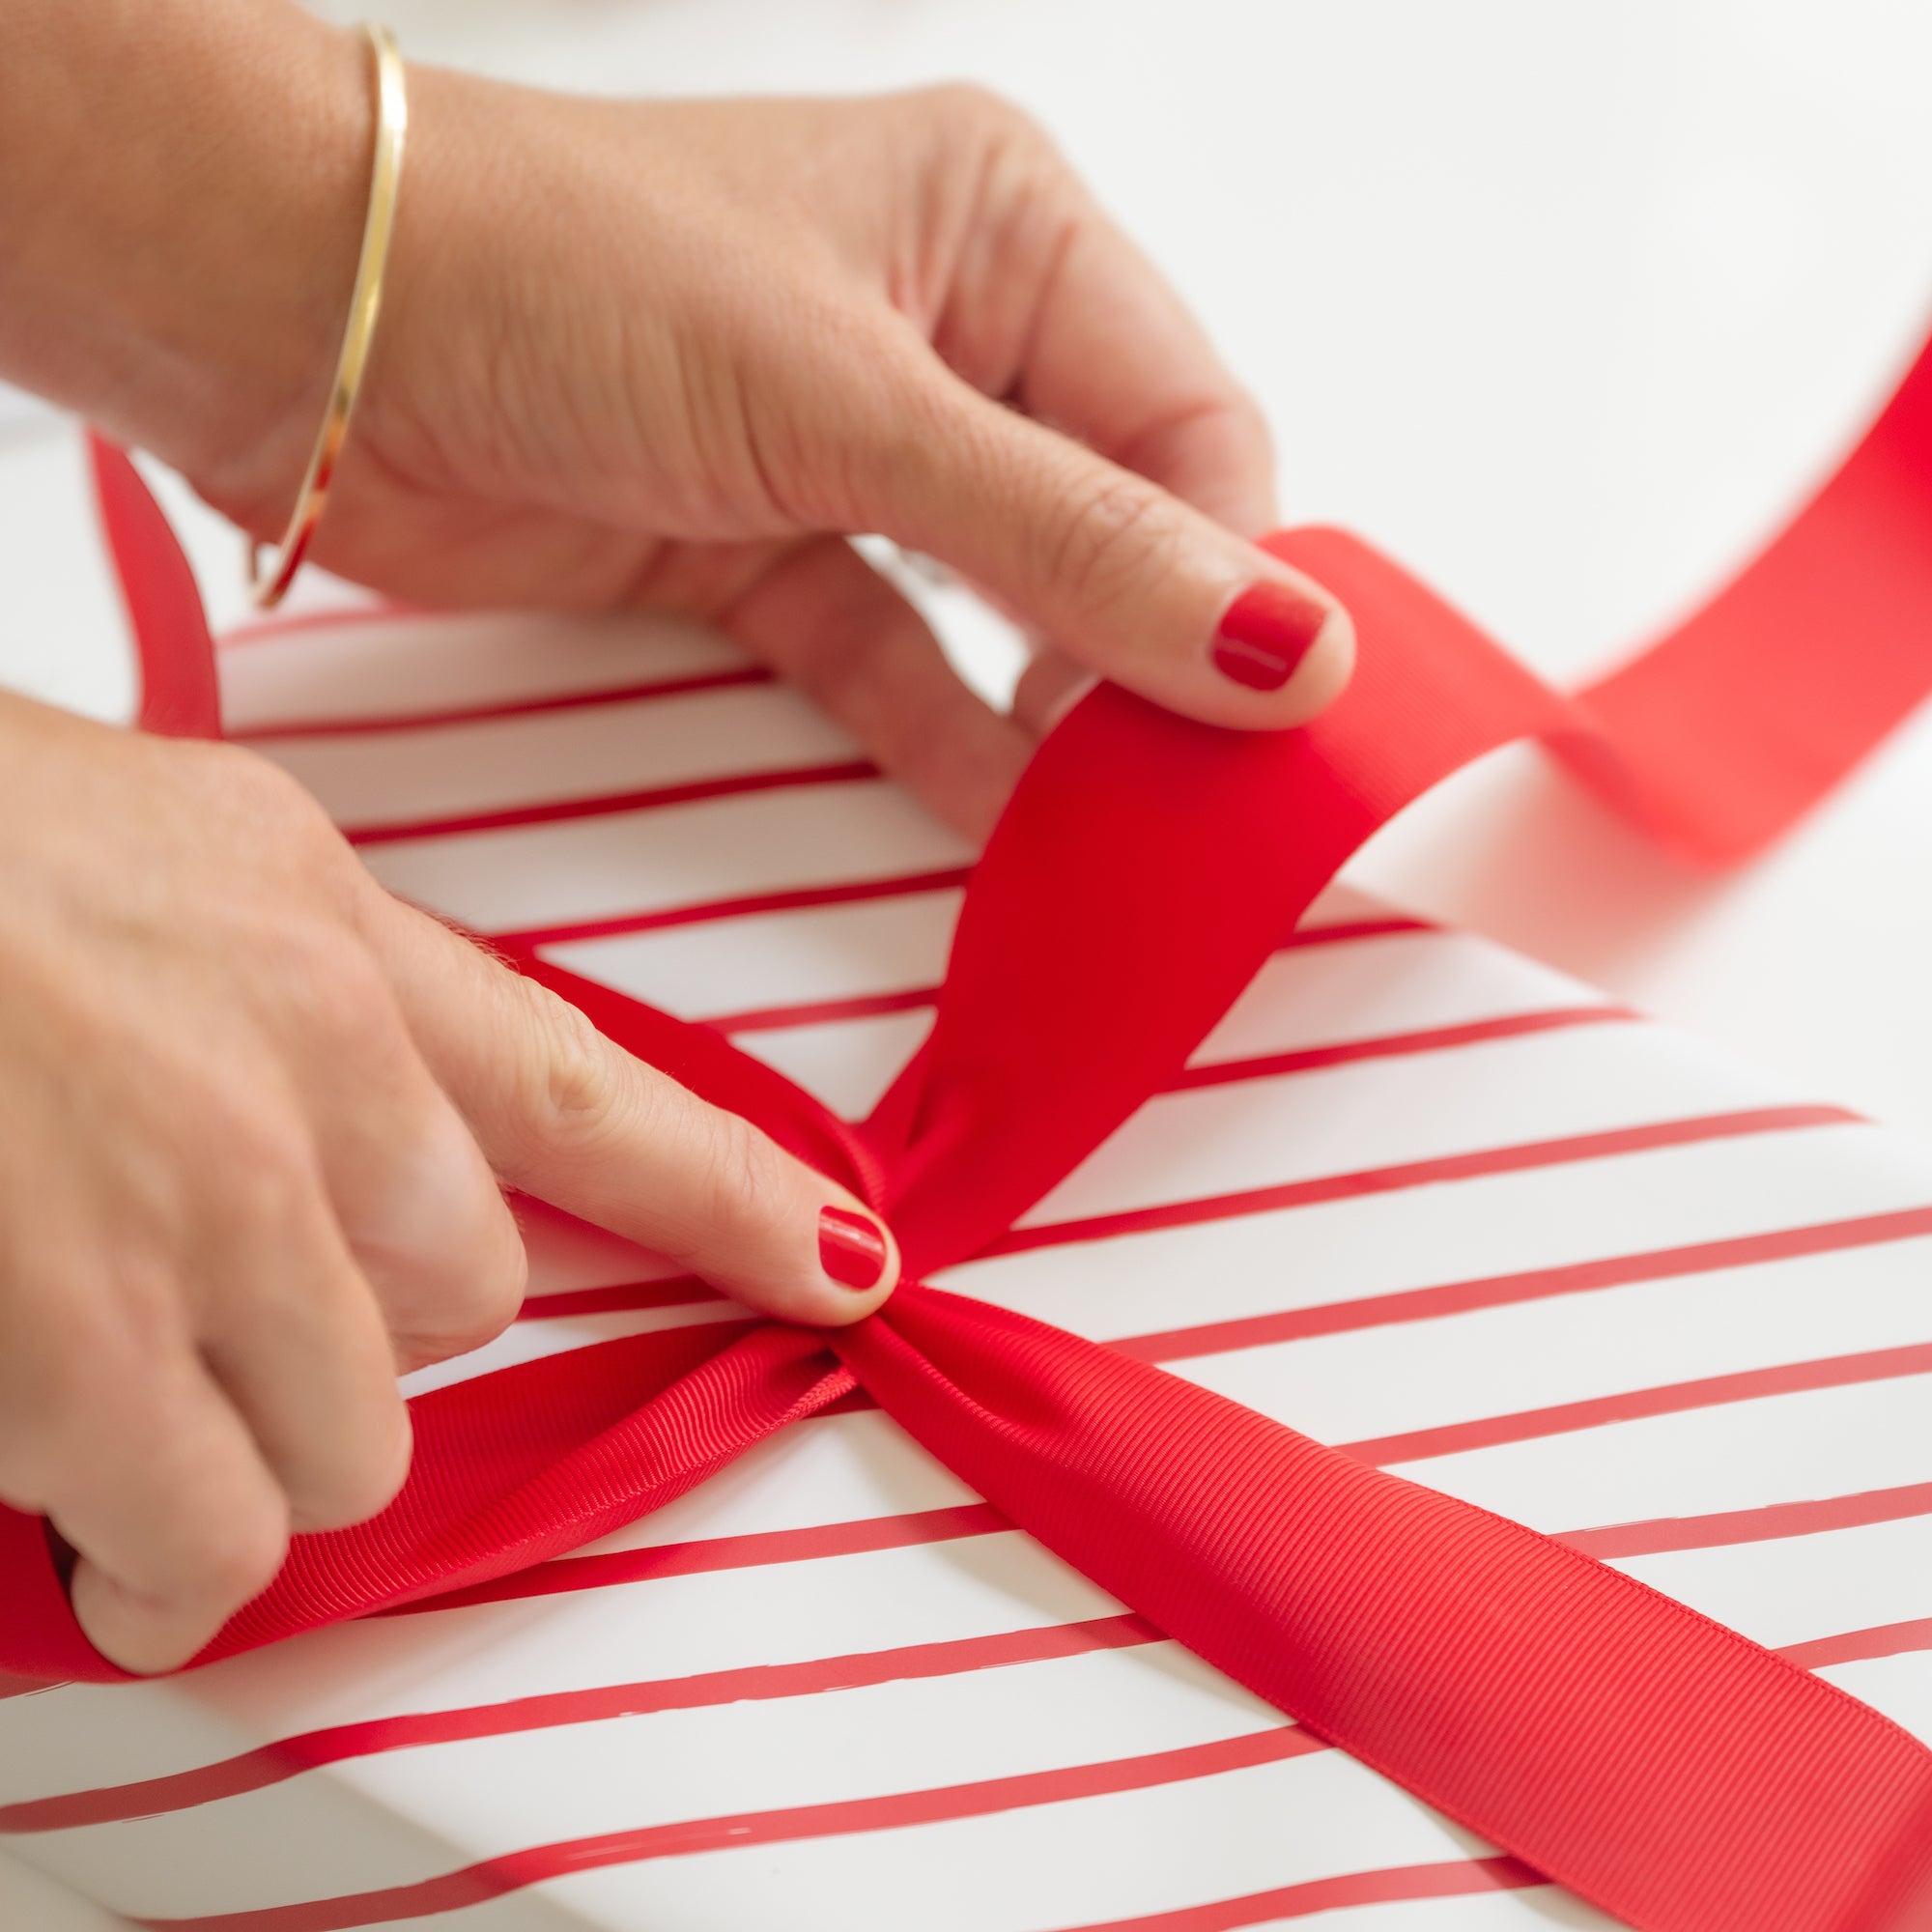 Ribbon being tied around gift